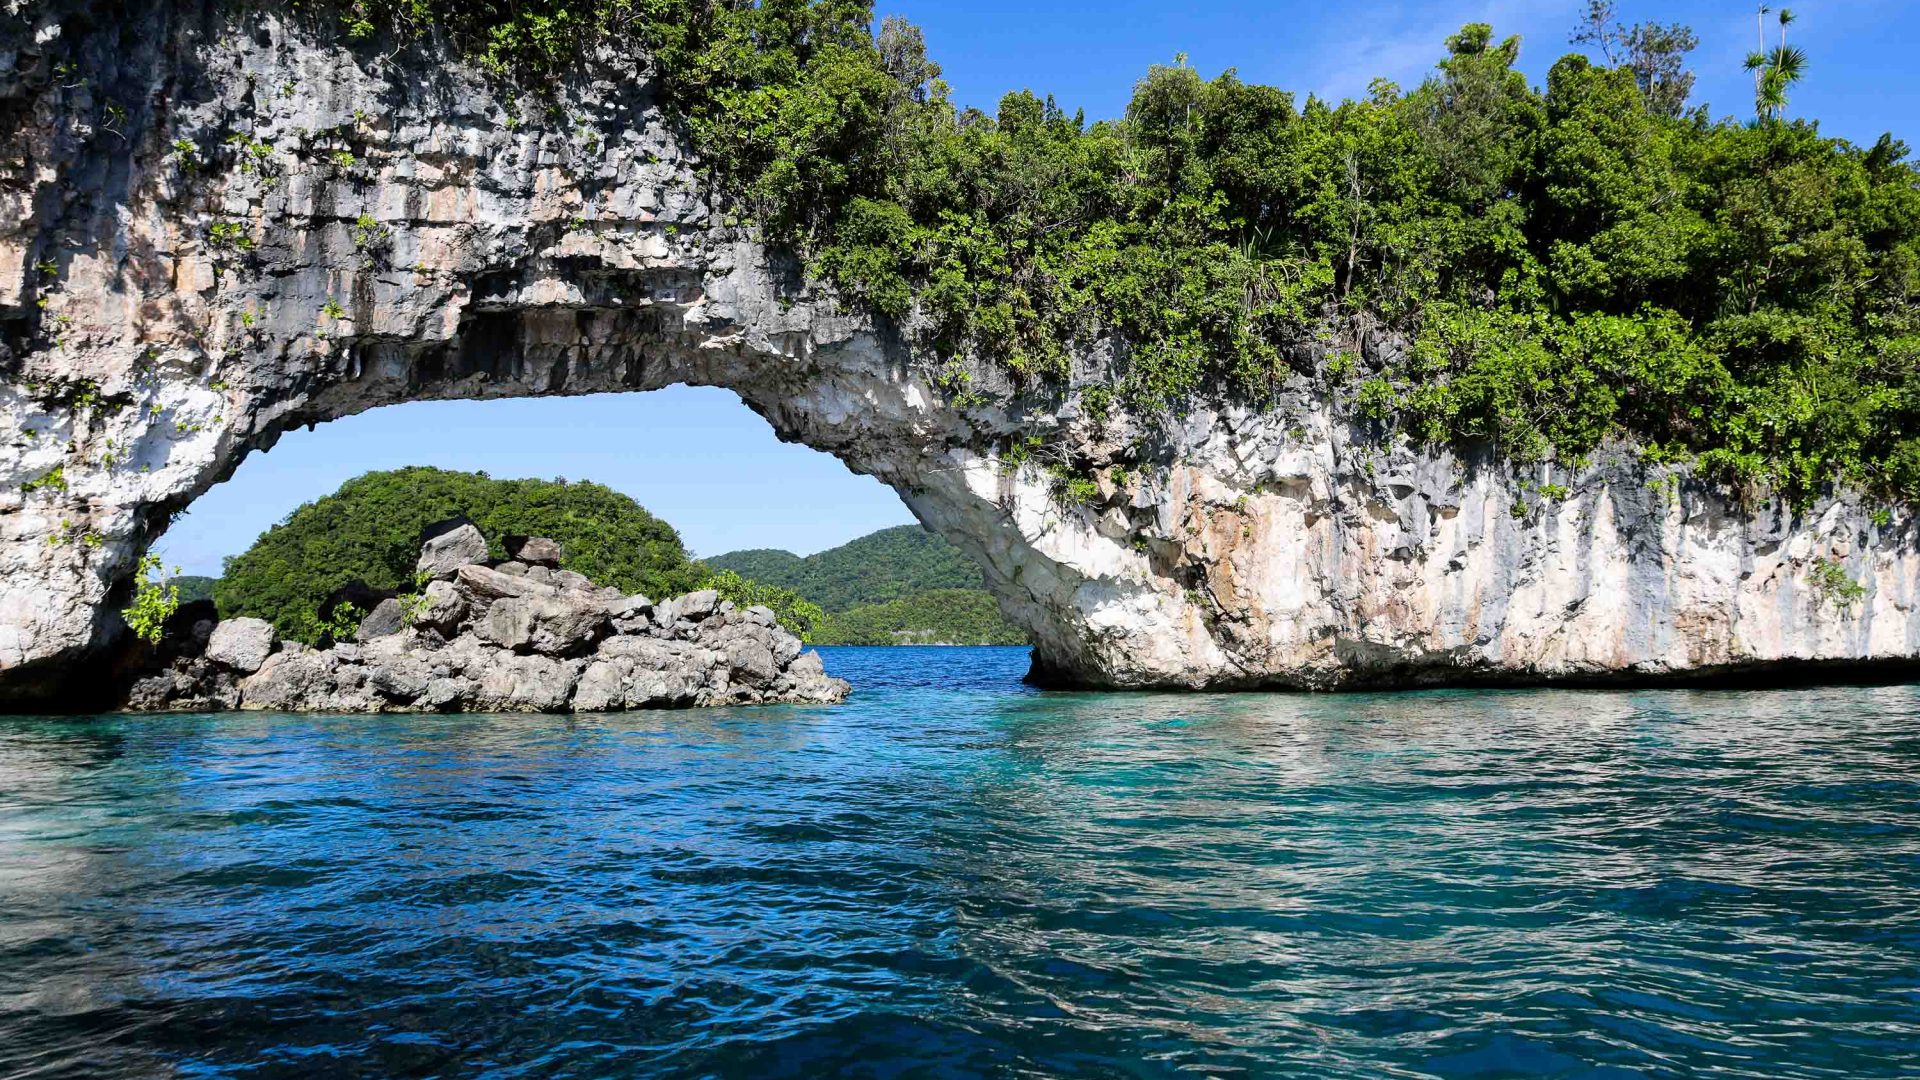 A rocky arch covered in trees, above the sea.